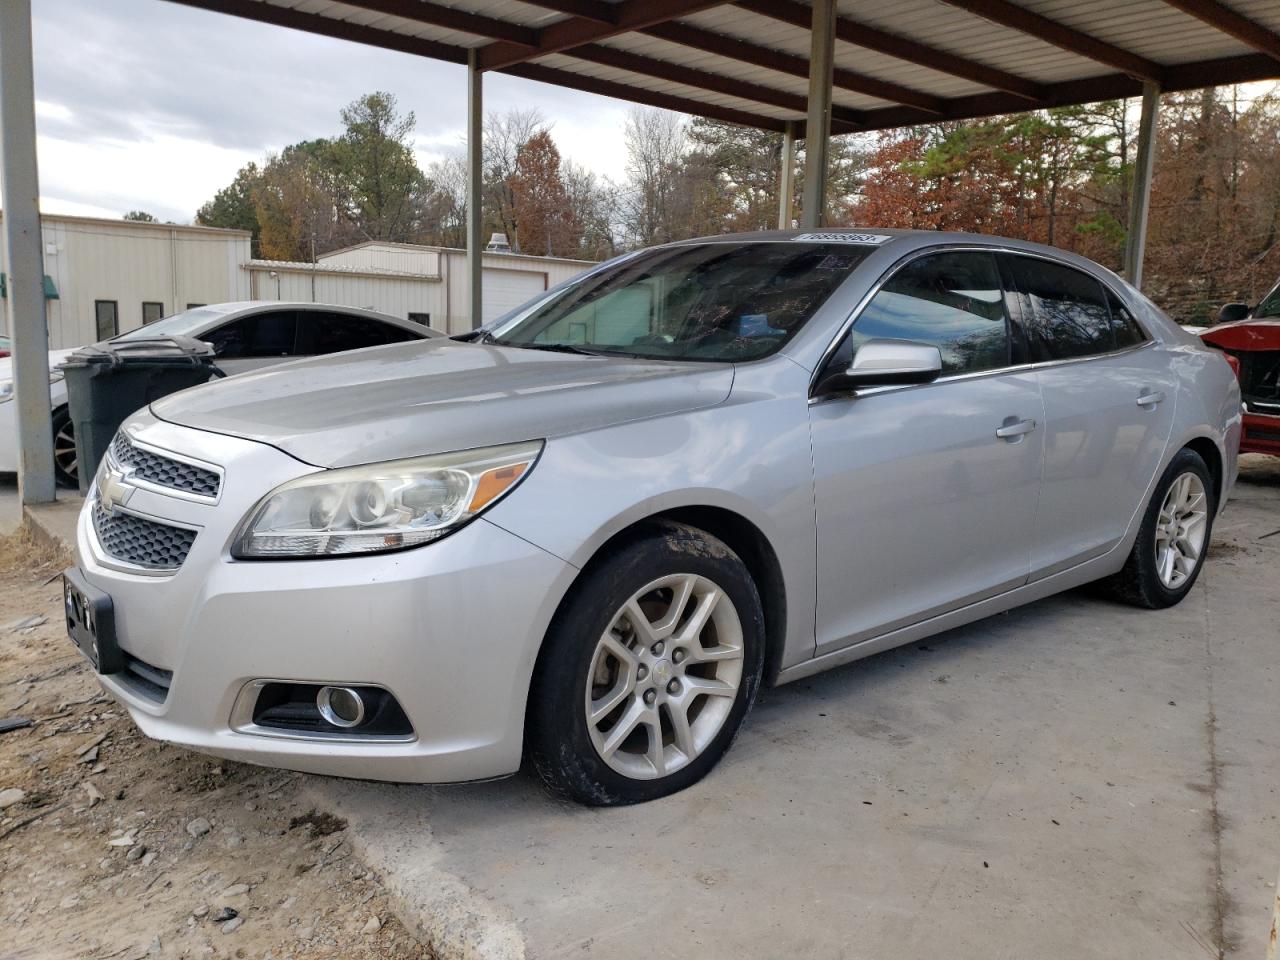 1G11F5RR1DF****** Salvage and Wrecked 2013 Chevrolet Malibu in AL - Hueytown